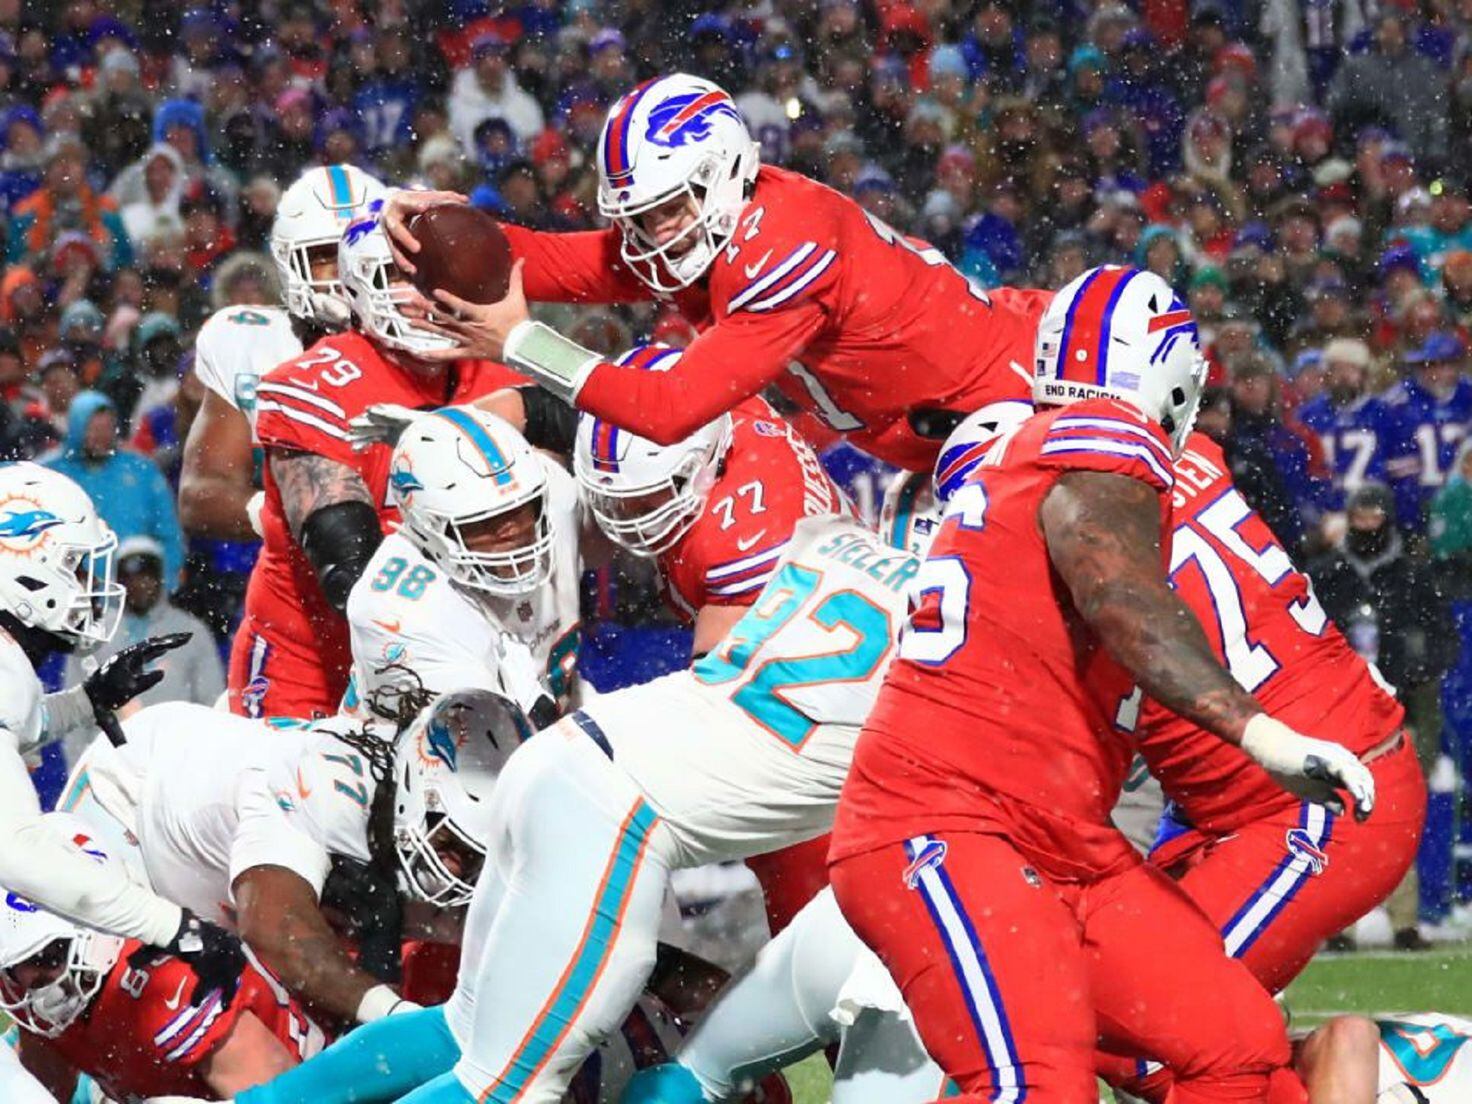 Miami Dolphins vs Buffalo Bills: times, how to watch on TV, stream online